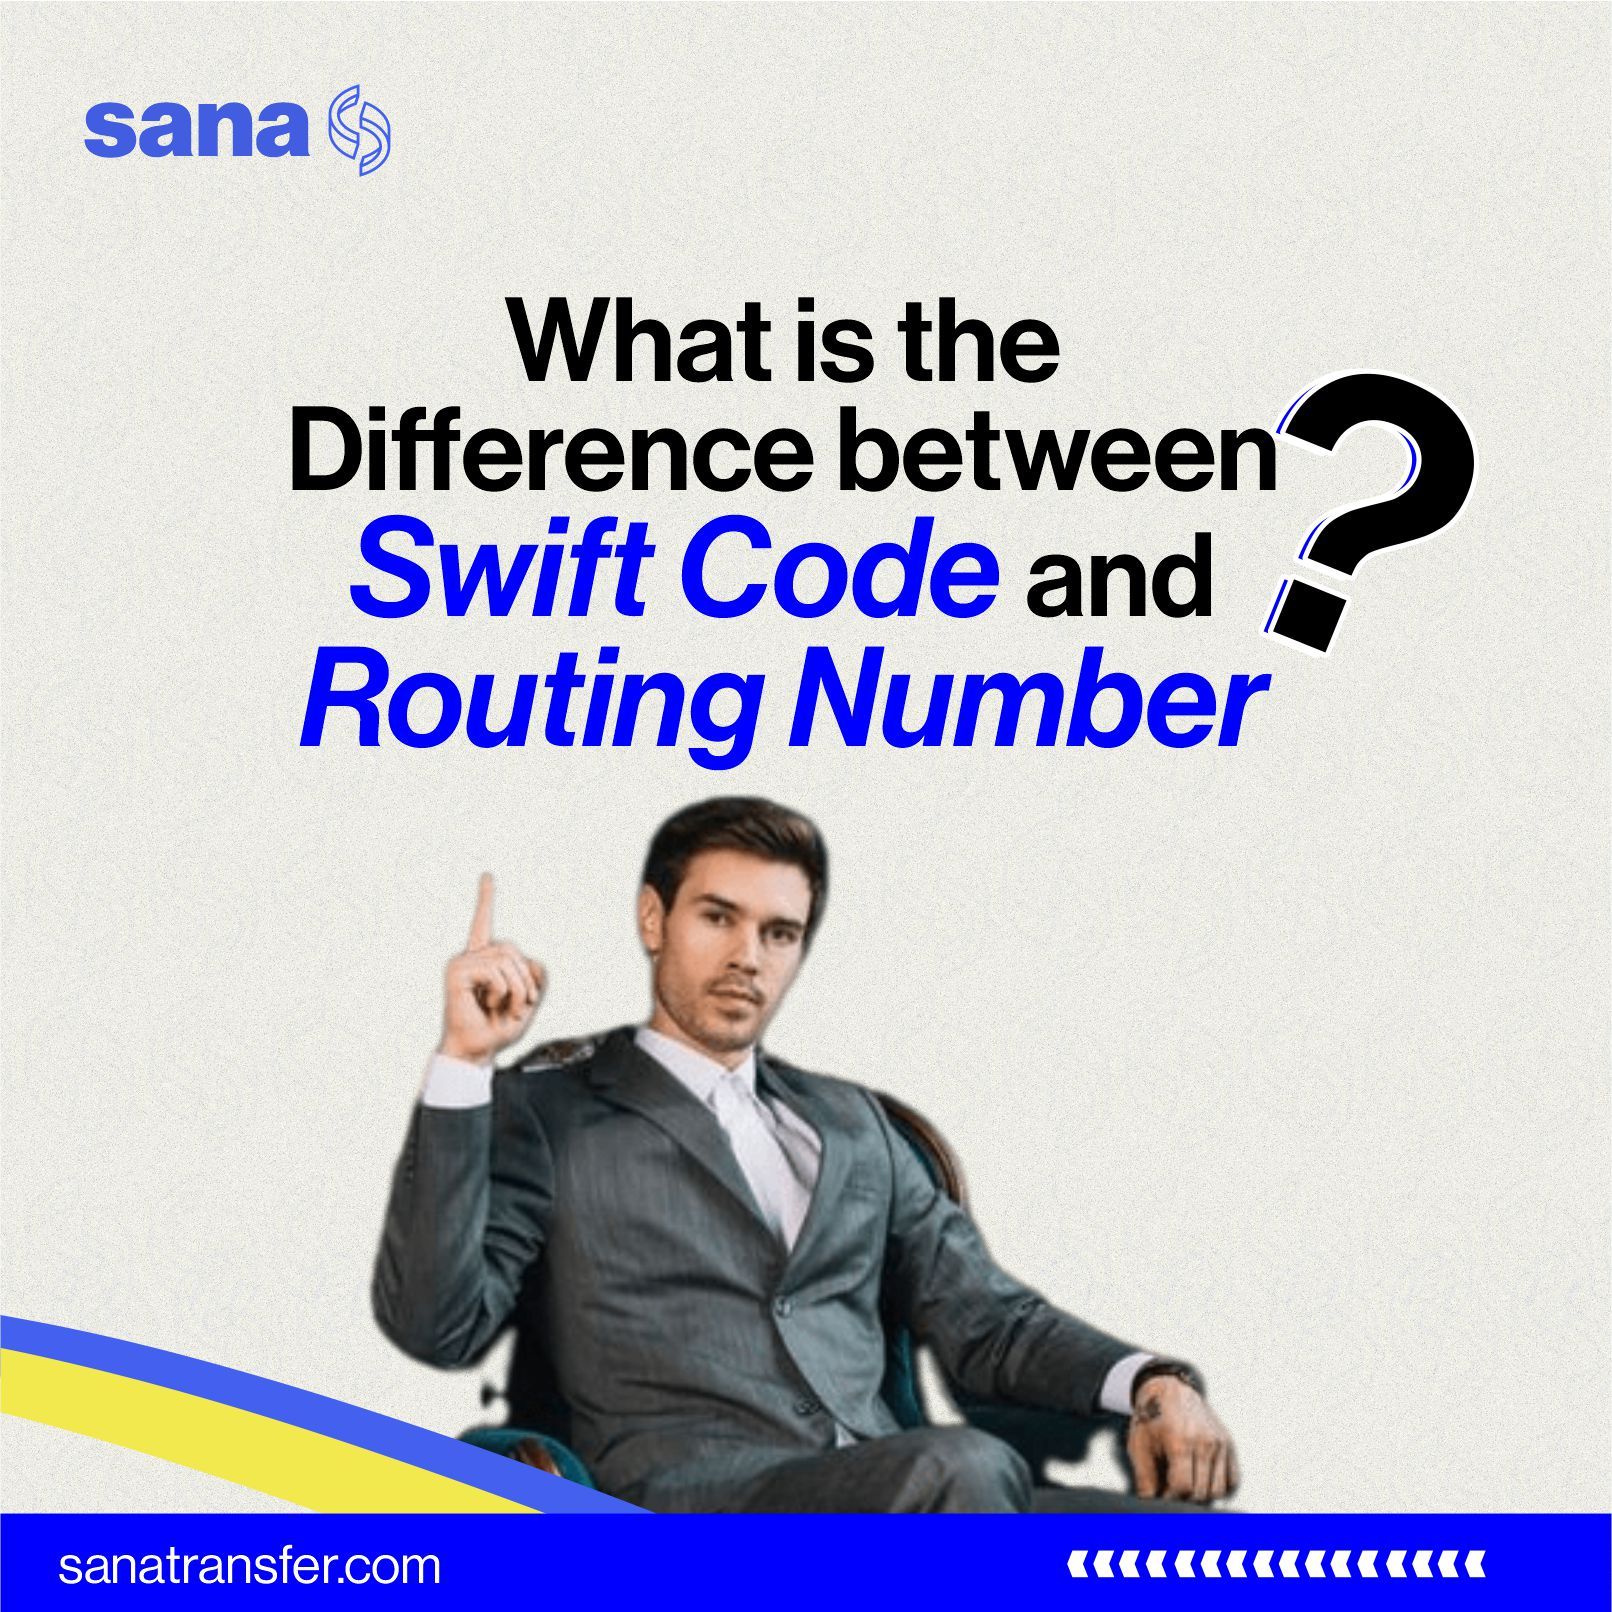 What is the Difference Between Swift Code and Routing Number?